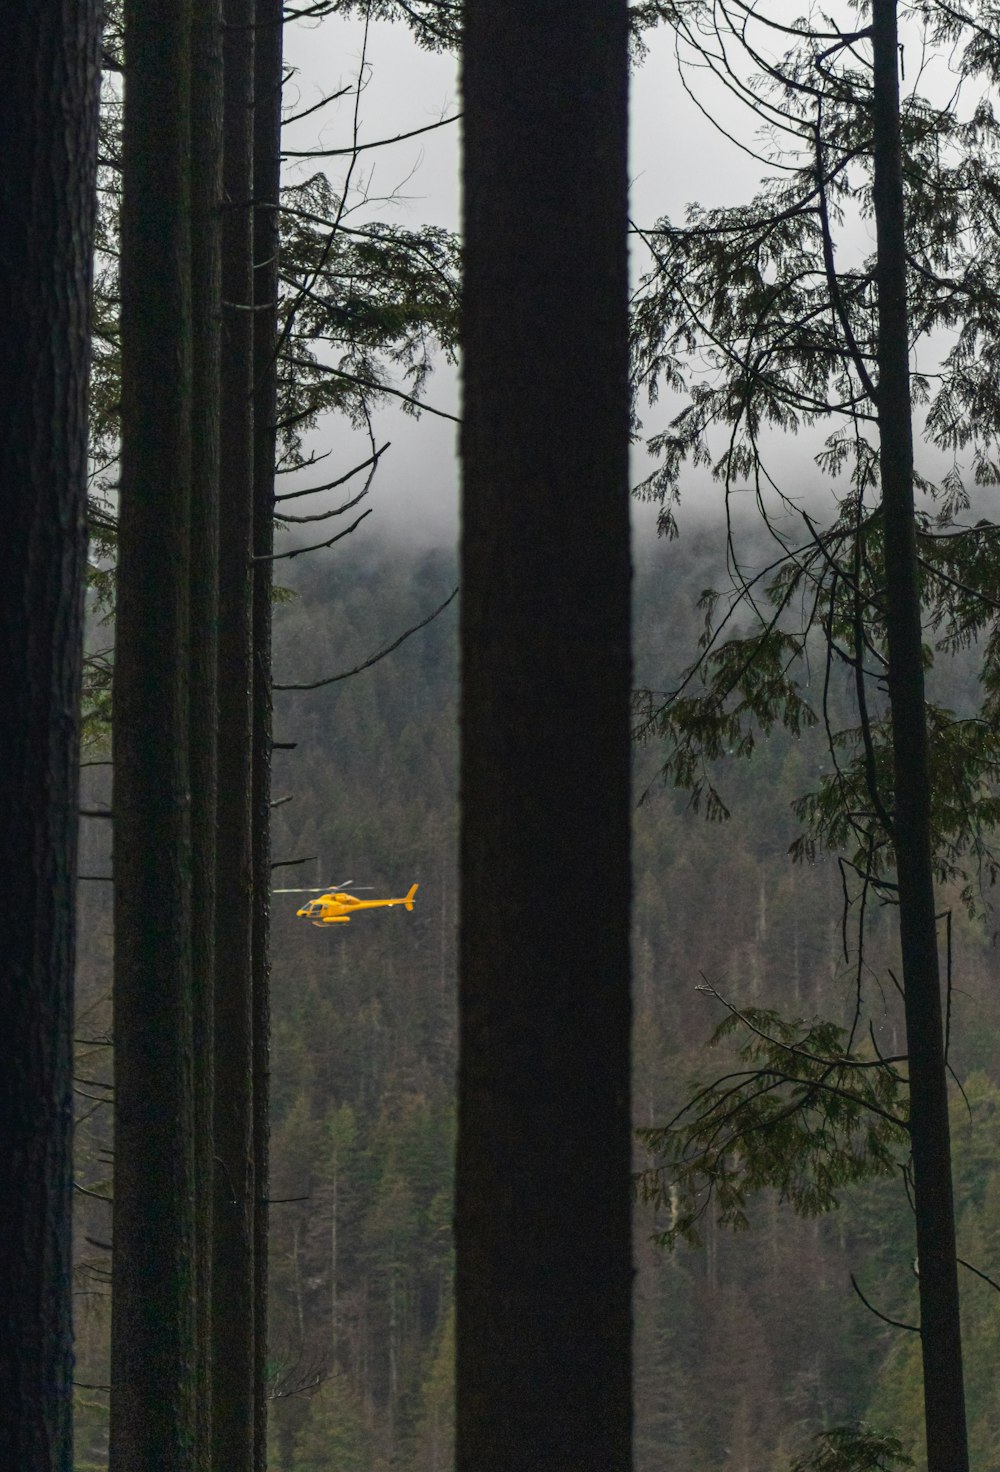 a yellow helicopter flying through a forest filled with trees